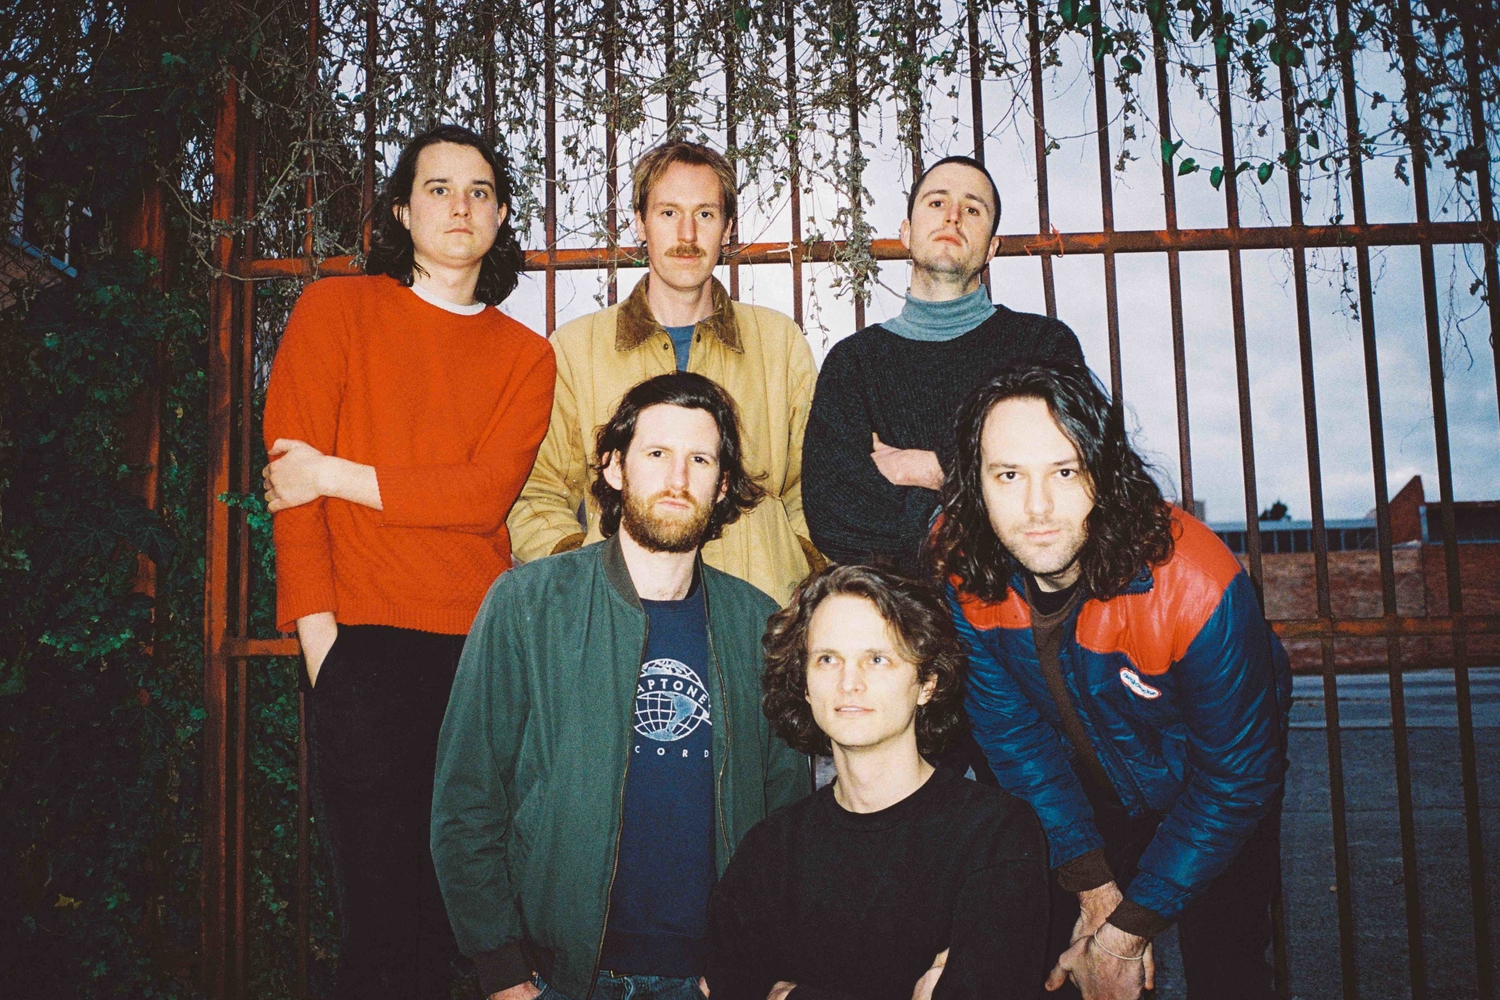 King Gizzard & The Lizard Wizard release new track 'If Not Now, Then When?'